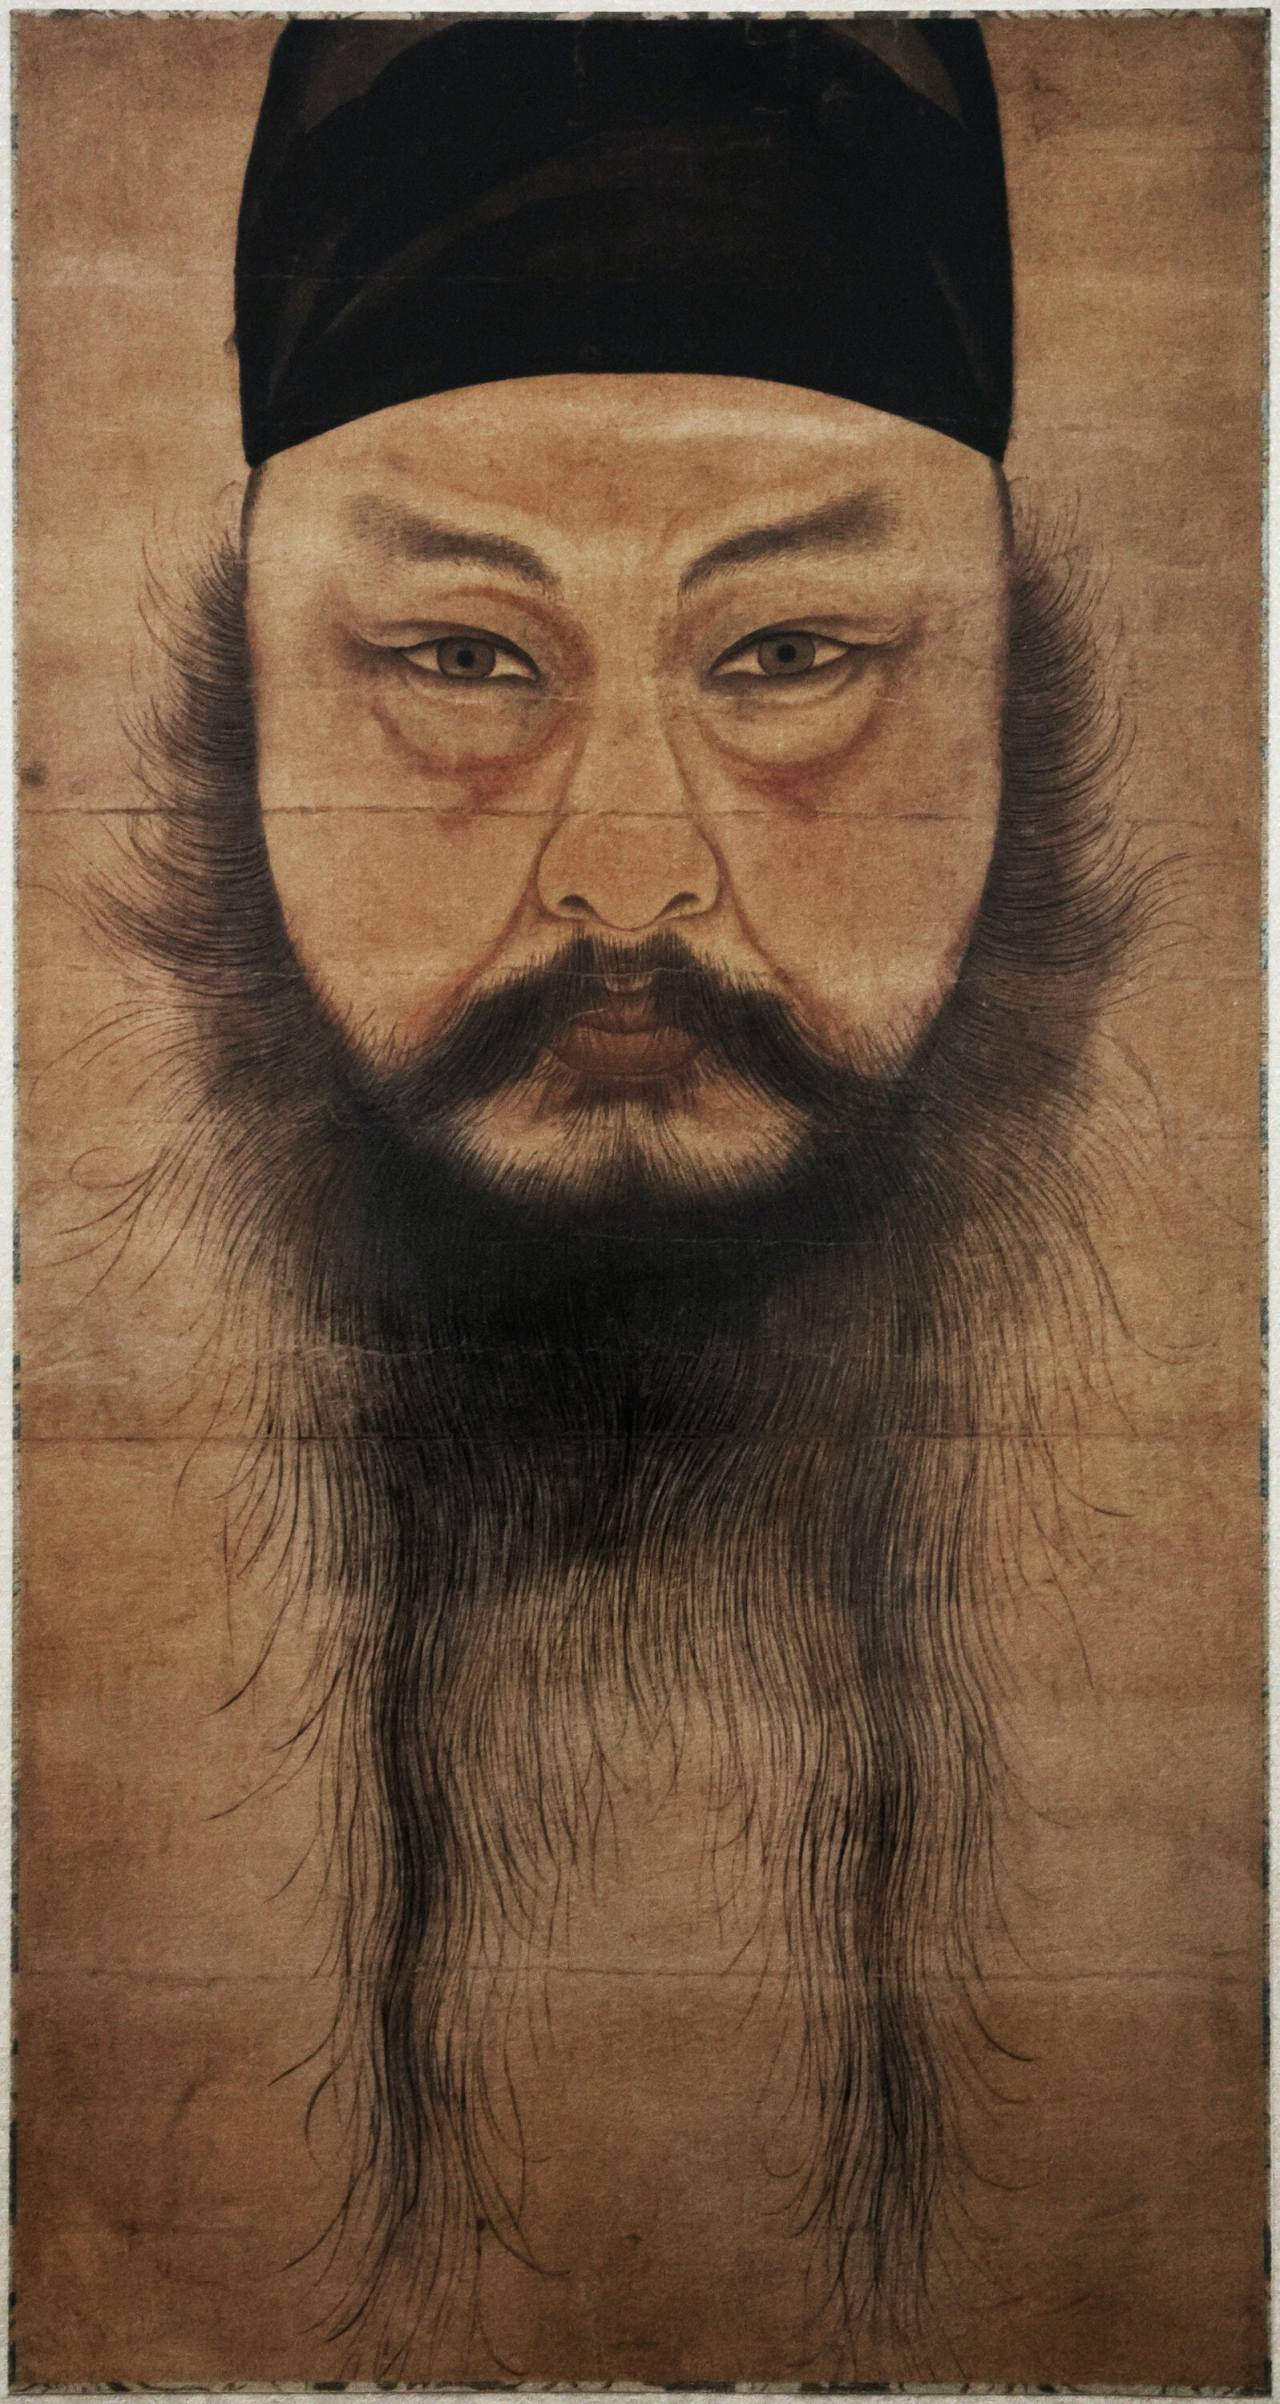 Self-portrait by Yun Du-seo (1668-1715), a painter and scholar from the Joseon era (Hyungwon Kang)